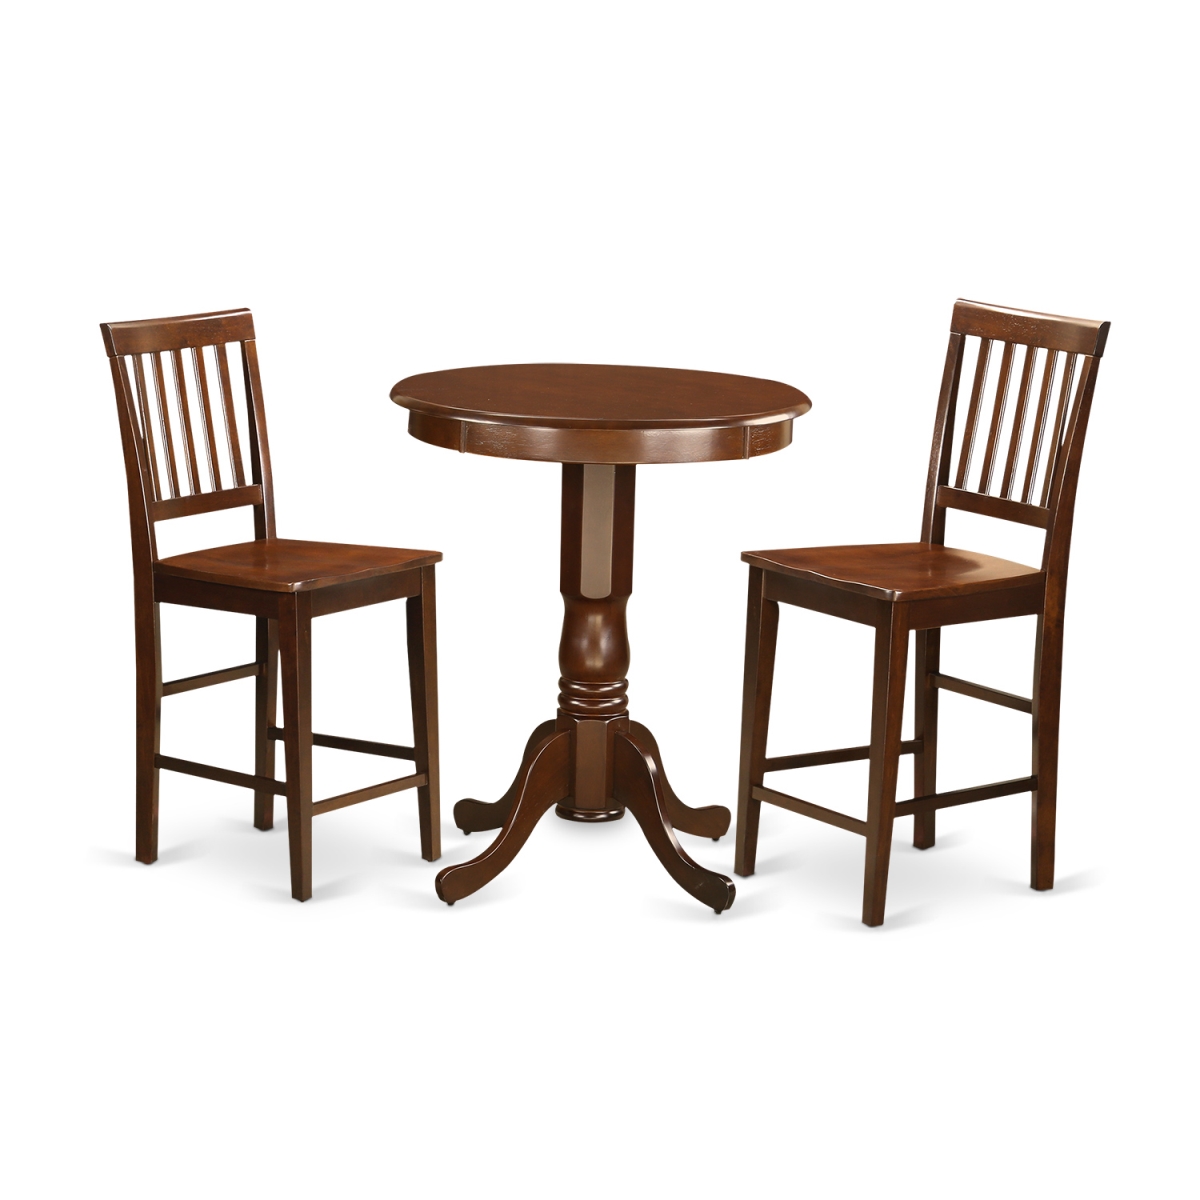 Counter Height Pub Table & 2 Chairs, Eden